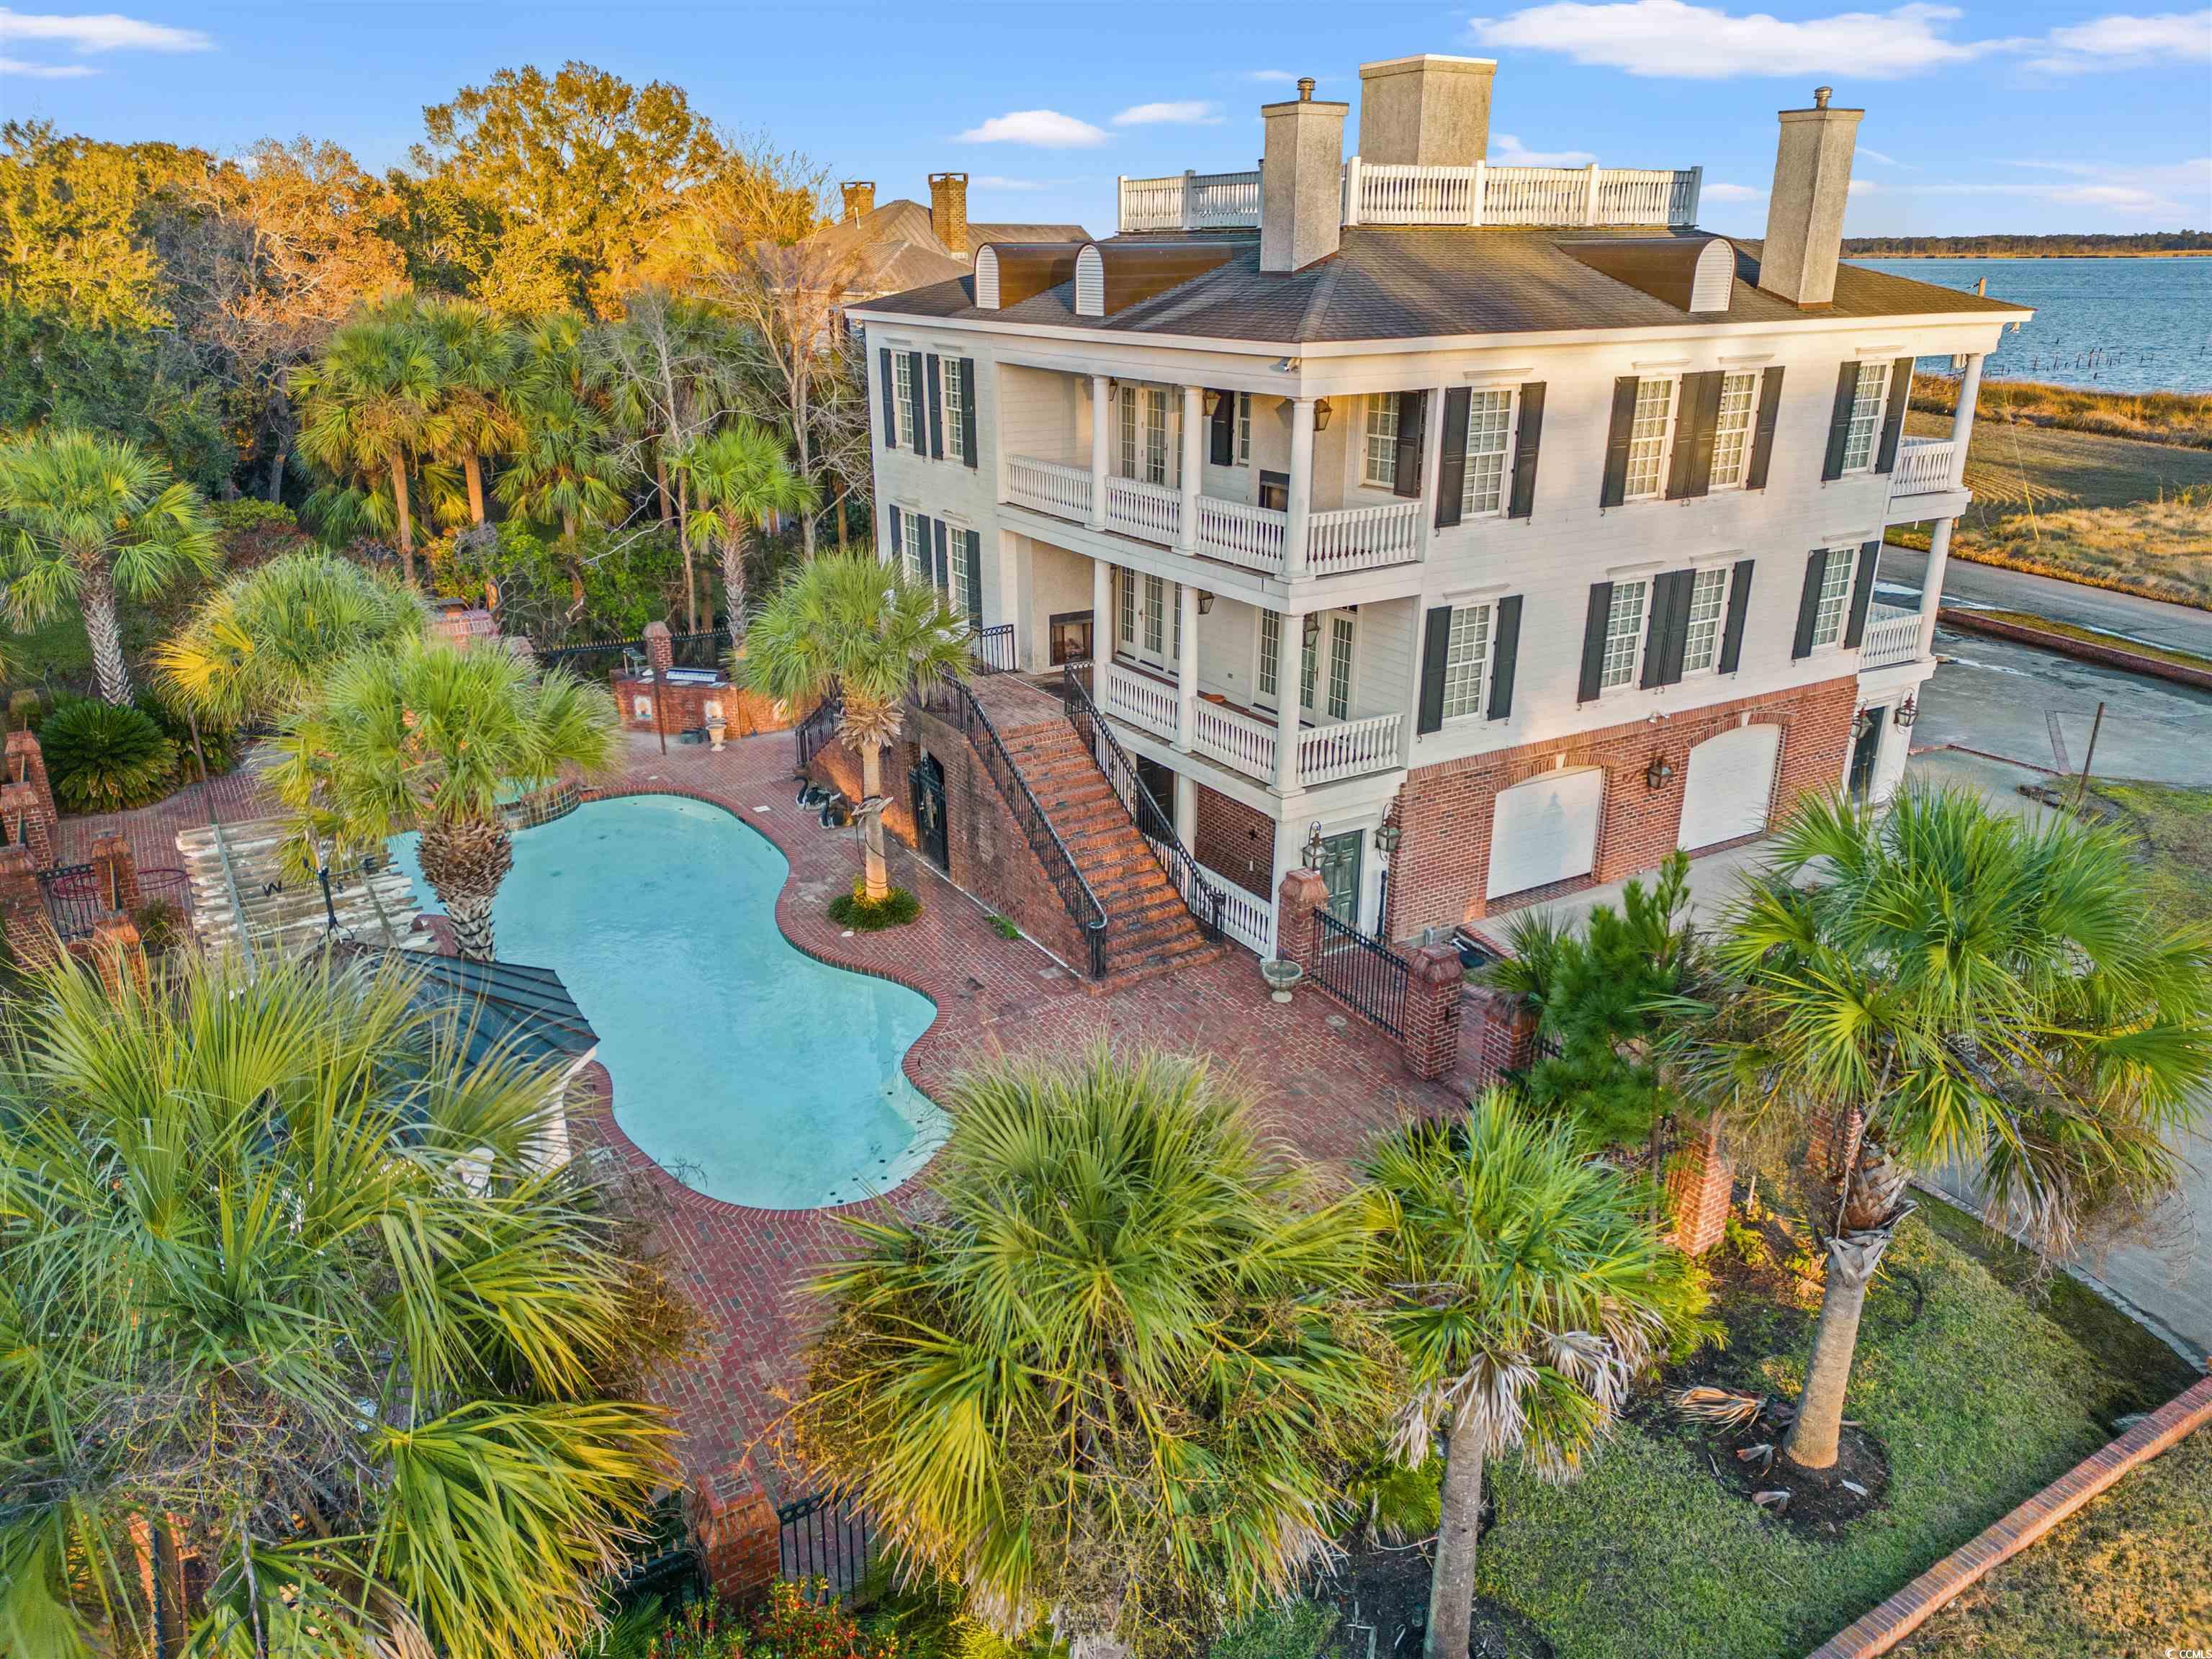 a georgetown jewel that would easily fit in with the mansions that line charleston's downtown battery, this high end, custom built home (designed from a plantation in la)  is the epitome of gracious southern living. with a setting overlooking winyah bay (& including the large waterfront acreage across the street) the home is adjacent to east bay park & downtown boat landing with access to the intercoastal waterway & the atlantic ocean. this beautiful home has just undergone an extensive renovation. custom details abound throughout from palmetto stone over the brick entrances, italian tiles in the backyard kitchen, the carved palmetto & crescent moon chair rail(no longer made due to expense), the sc seal brass medallions adorning the fireplaces and tradd street charleston gas lights throughout. as you walk through the mahogany front door, elegant formal living and dining rooms complete with wainscotting lead to the large family room and kitchen featuring a 60" viking commercial oven with hood, kohler sink with built in steamer, kohler bar sink on large island, viking electric oven, warming drawers, trash compactor, 48" viking refrigerator and fisher pactel built in dishwasher 'drawers'. this floor includes one of the two laundry rooms, powder room with progressive lights & wine room. home features a large master bedroom and bath (which includes one of the nine fireplaces), two more bedrooms, each with their own bath and a study/sitting/4th bedroom. a full size staircase takes you to the attic for storage galore. take the elevator to the rooftop 'widows walk' for a panoramic view of the park, winyah bay & hobcaw barony to enjoy bay breezes under starry skies. the spacious cherry paneled elevator travels from the ground level to rooftop for easy access to all floors. on the ground level, you will find a garage that has openings on both ends, bottom foyer entry, 2nd downstairs laundry, an extra large bathroom for pool and patio dinner guests, and more storage. the backyard oasis includes pool with a waterfall, gazebo and expansive outdoor kitchen for entertaining al fresco. pool and hot tub can be heated if purchaser desires to add heater.  home also features commercial caterpillar generator in case of power outages, inside and outside speakers and sprinkler system. plantation shutters and hurricane shutters stay with home. because georgetown is a waterfront town , the streets around the home have intermittent tidal flooding which occasionally impacts the yard . however, the home has not flooded.  the waterfront lot directly across from the home on winyah bay, which is included in the sale, is the site of the old ferry that traveled to waverly mills to transport travelers to pawleys island. remnants of the pier are still visible. downtown georgetown's shopping, restaurants and harborwalk are just blocks away, the beaches of pawleys island 12 miles, myrtle beach 30 miles and charleston 60 miles to the south. video has been provided with listing to showcase this fine home.